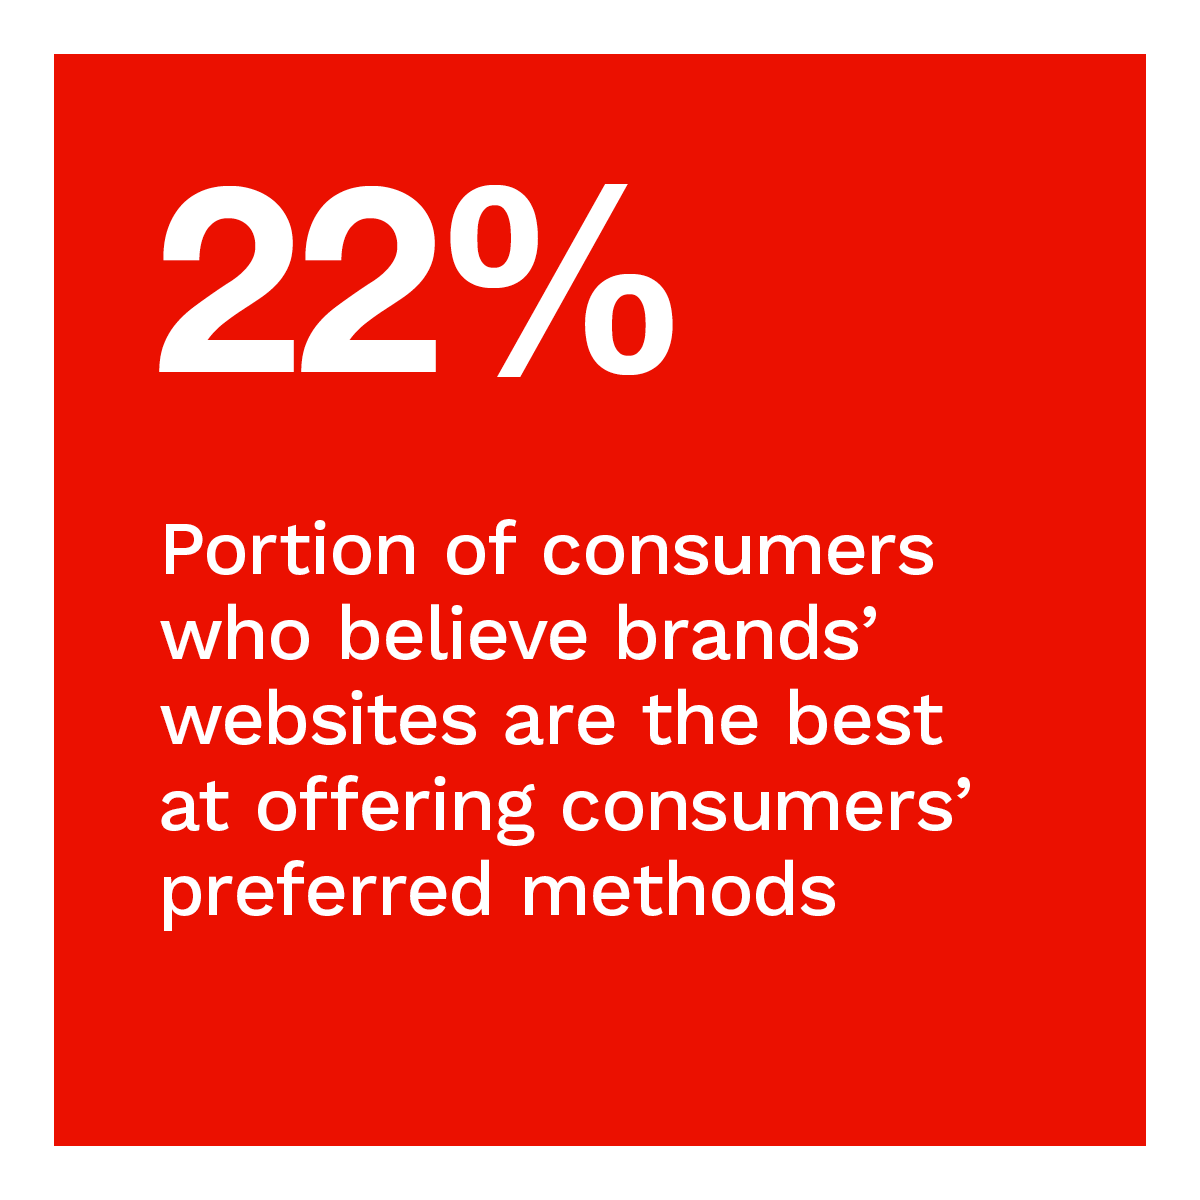 22%: Portion of consumers who believe brands’ websites are the best at offering consumers’ preferred methods